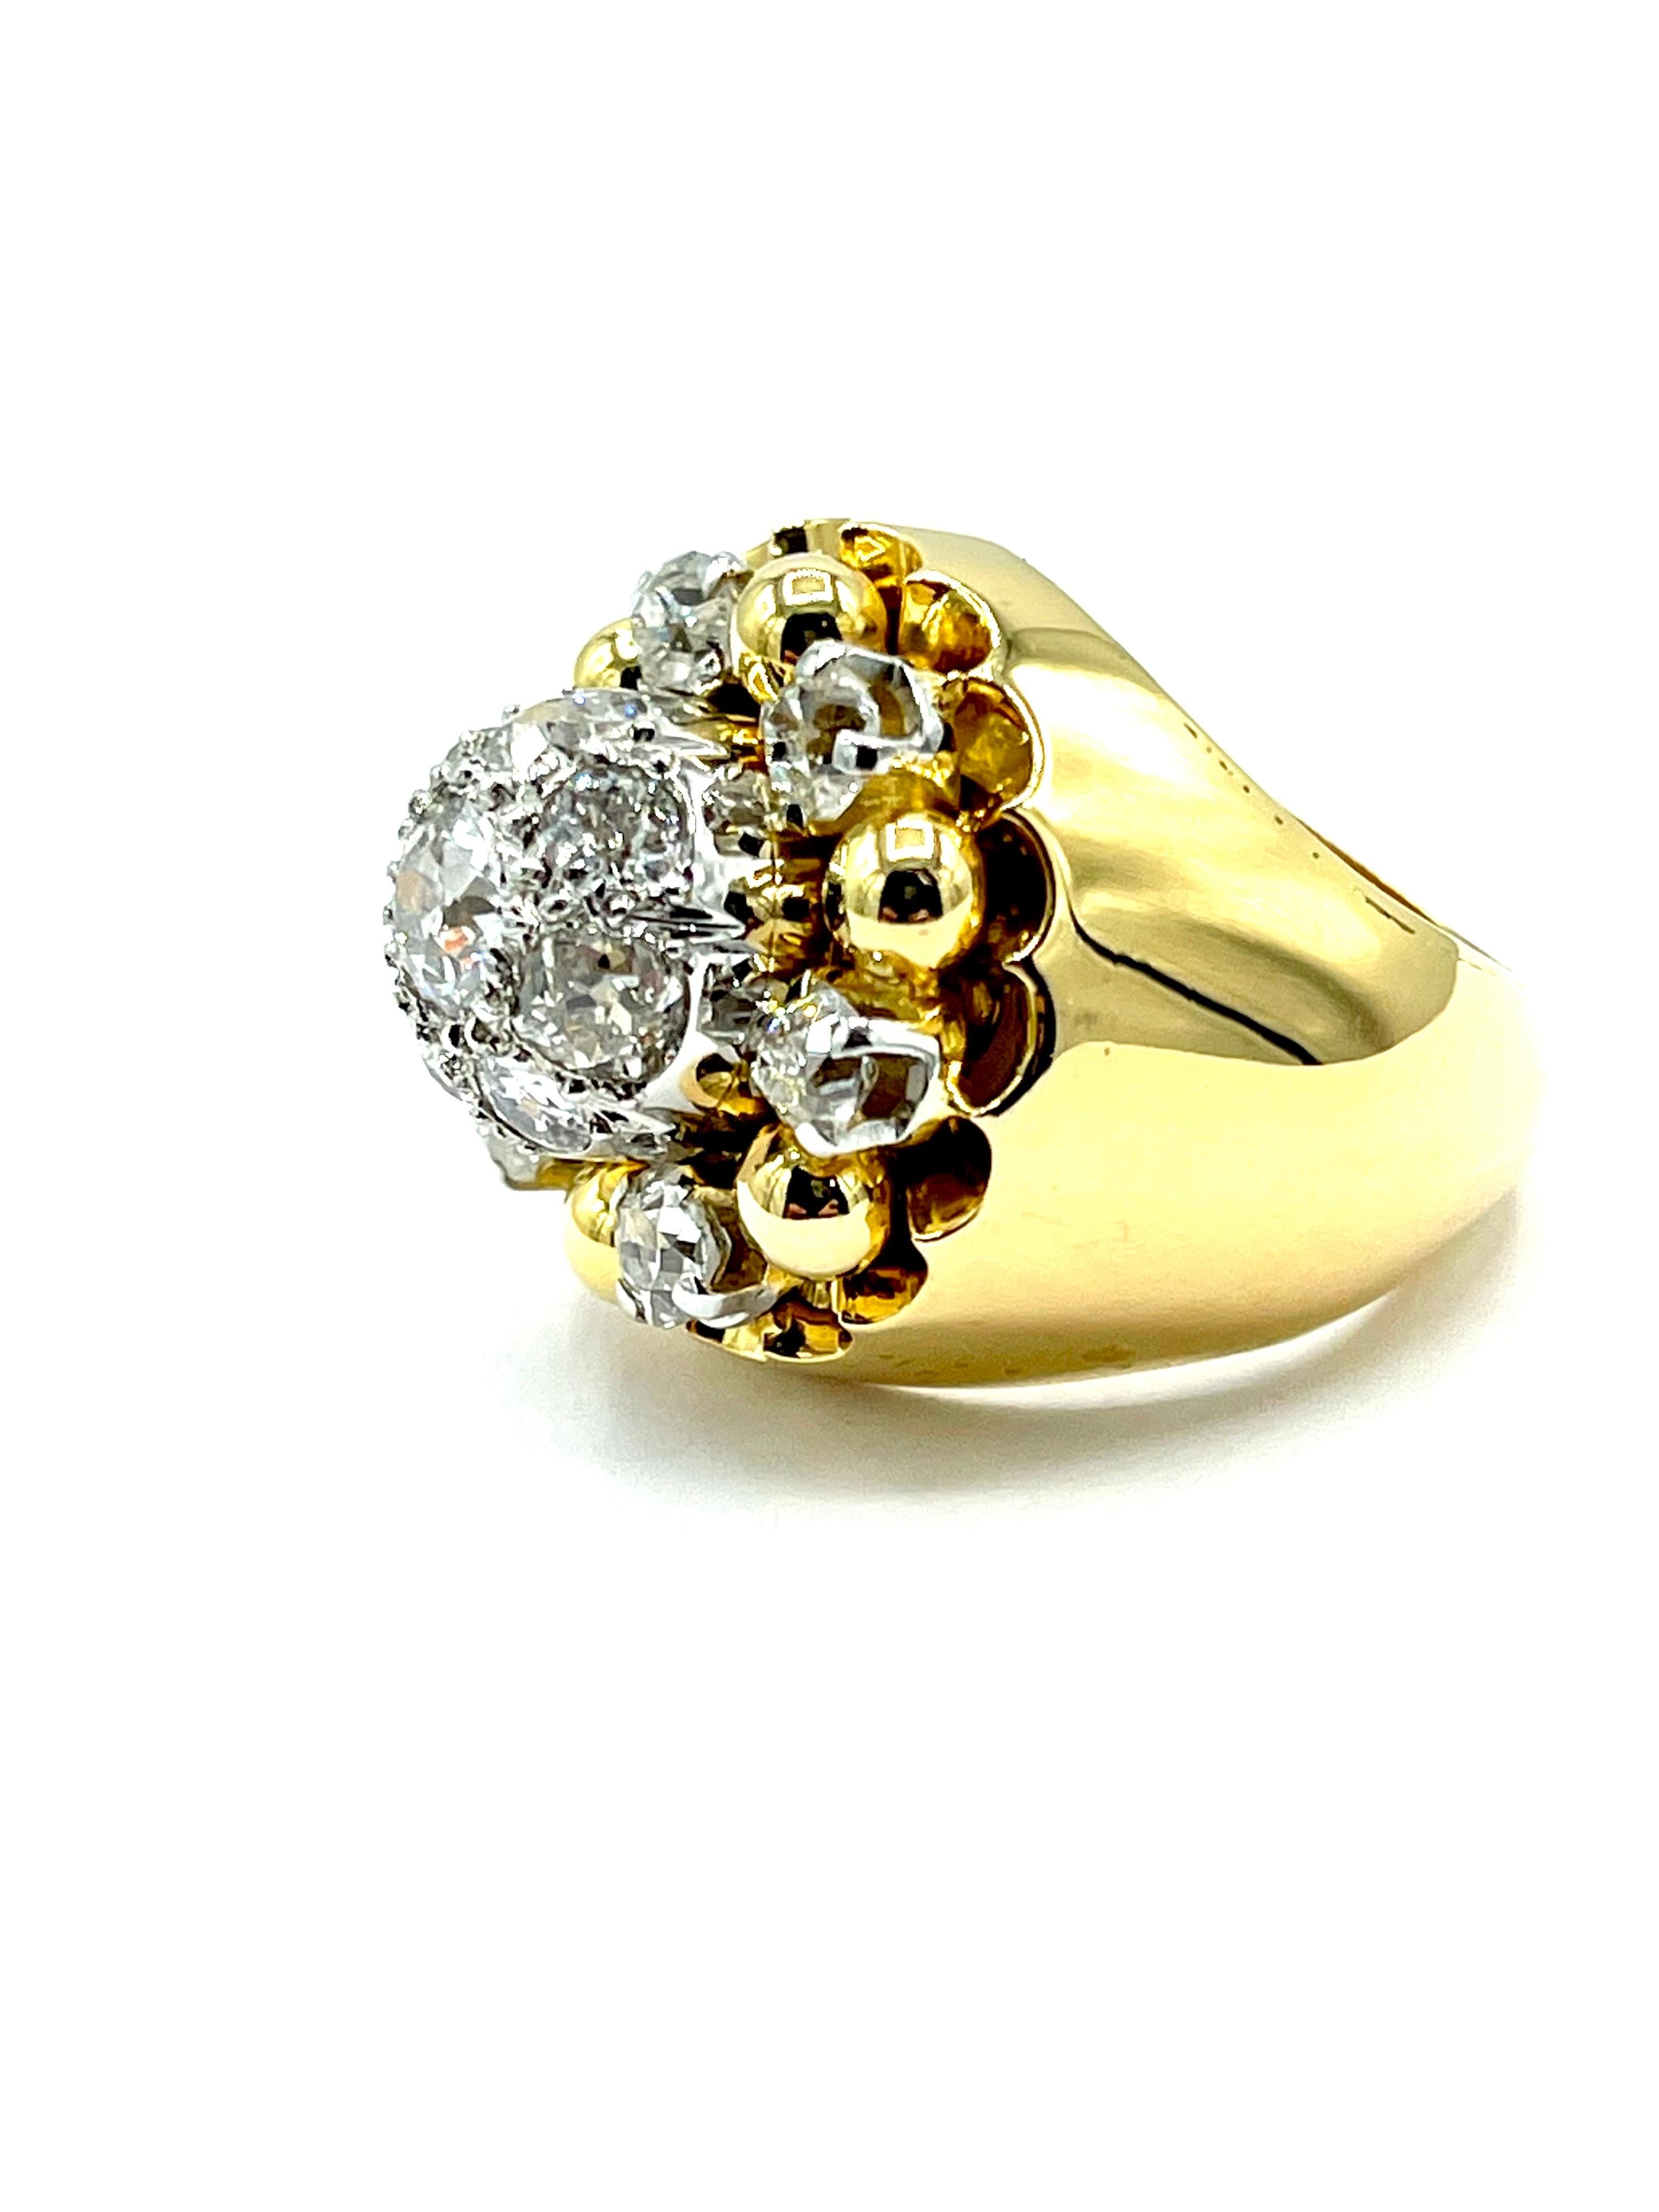 French Made 2.10 Carat Old European Cut Diamond and 18k Yellow Gold Ring In Excellent Condition For Sale In Chevy Chase, MD